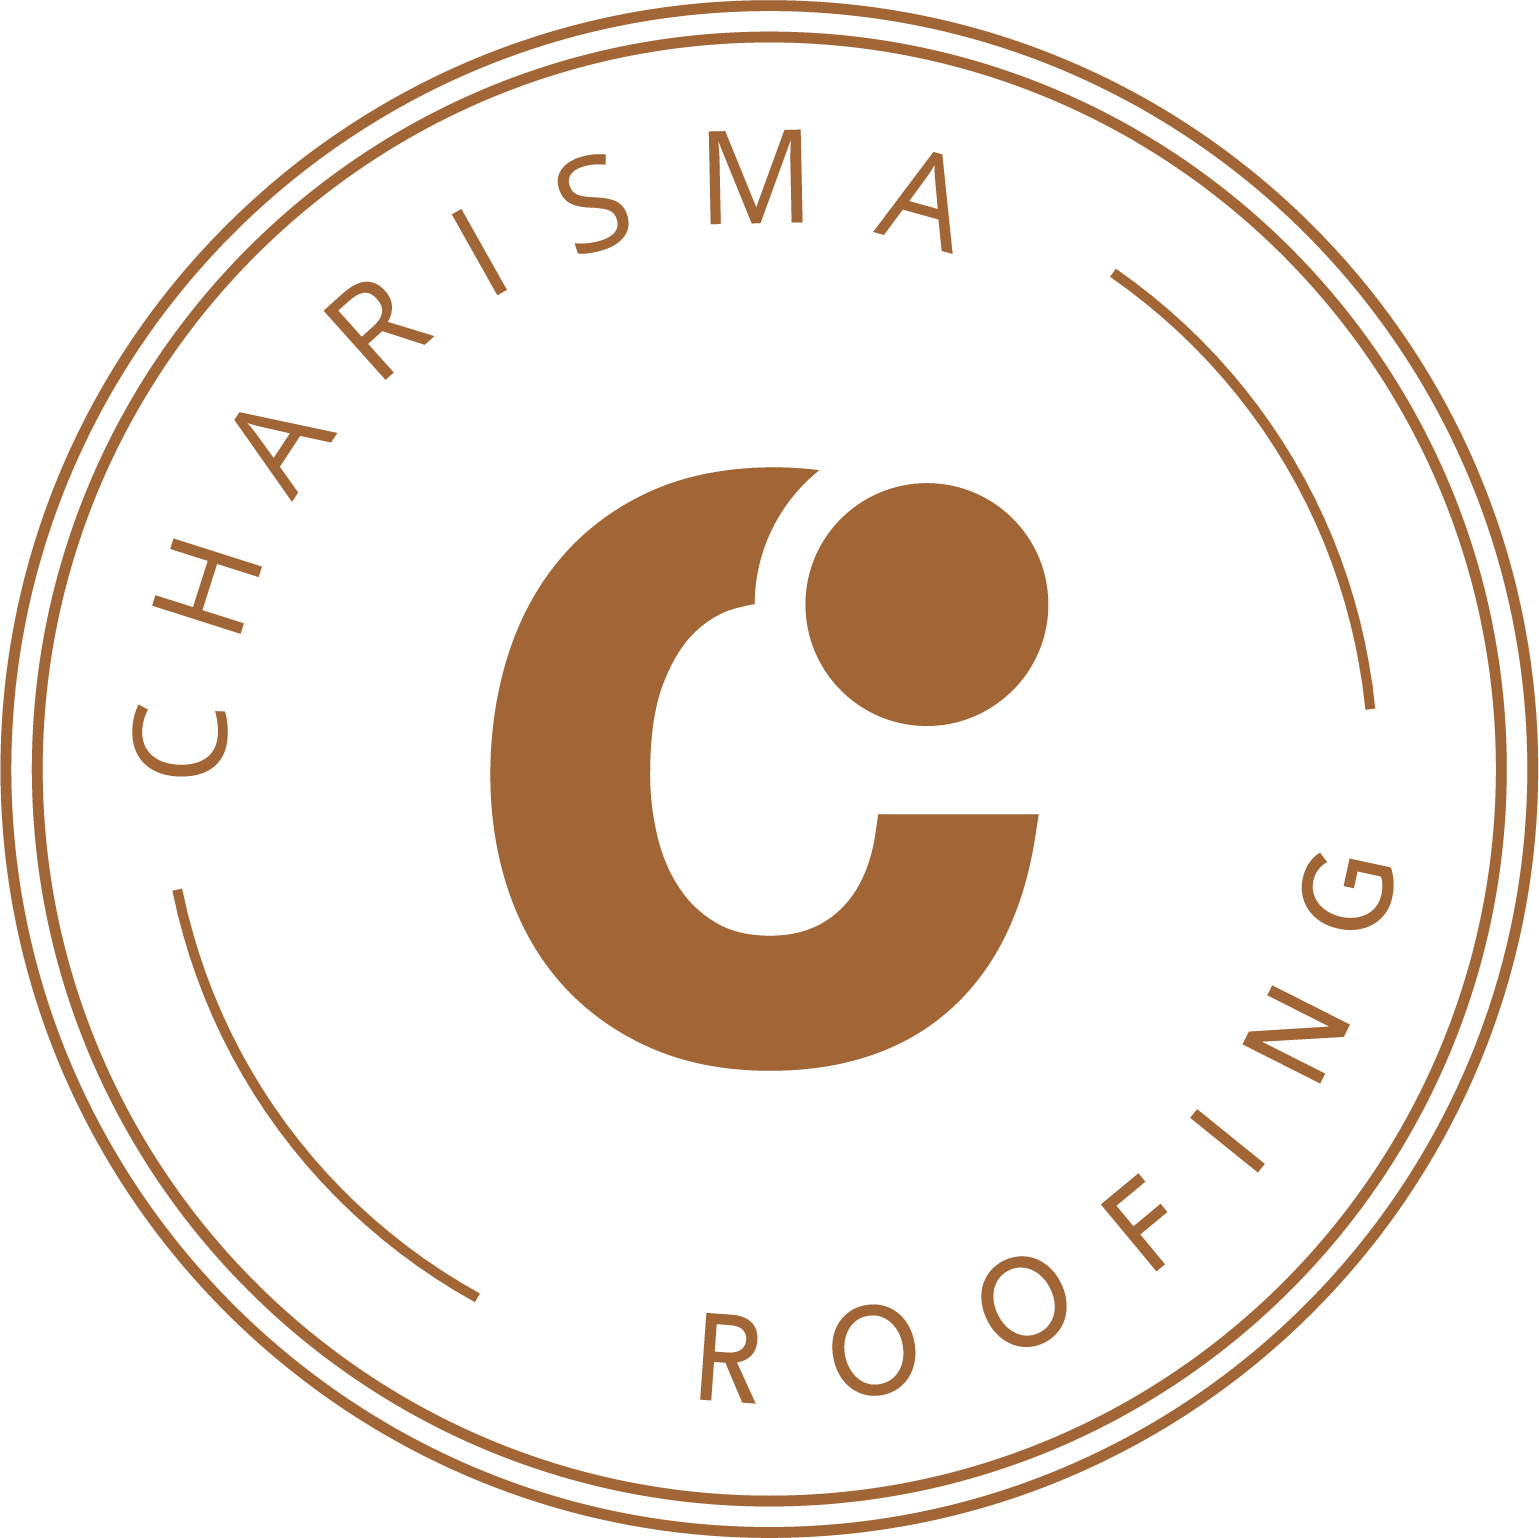 Charisma Roofing